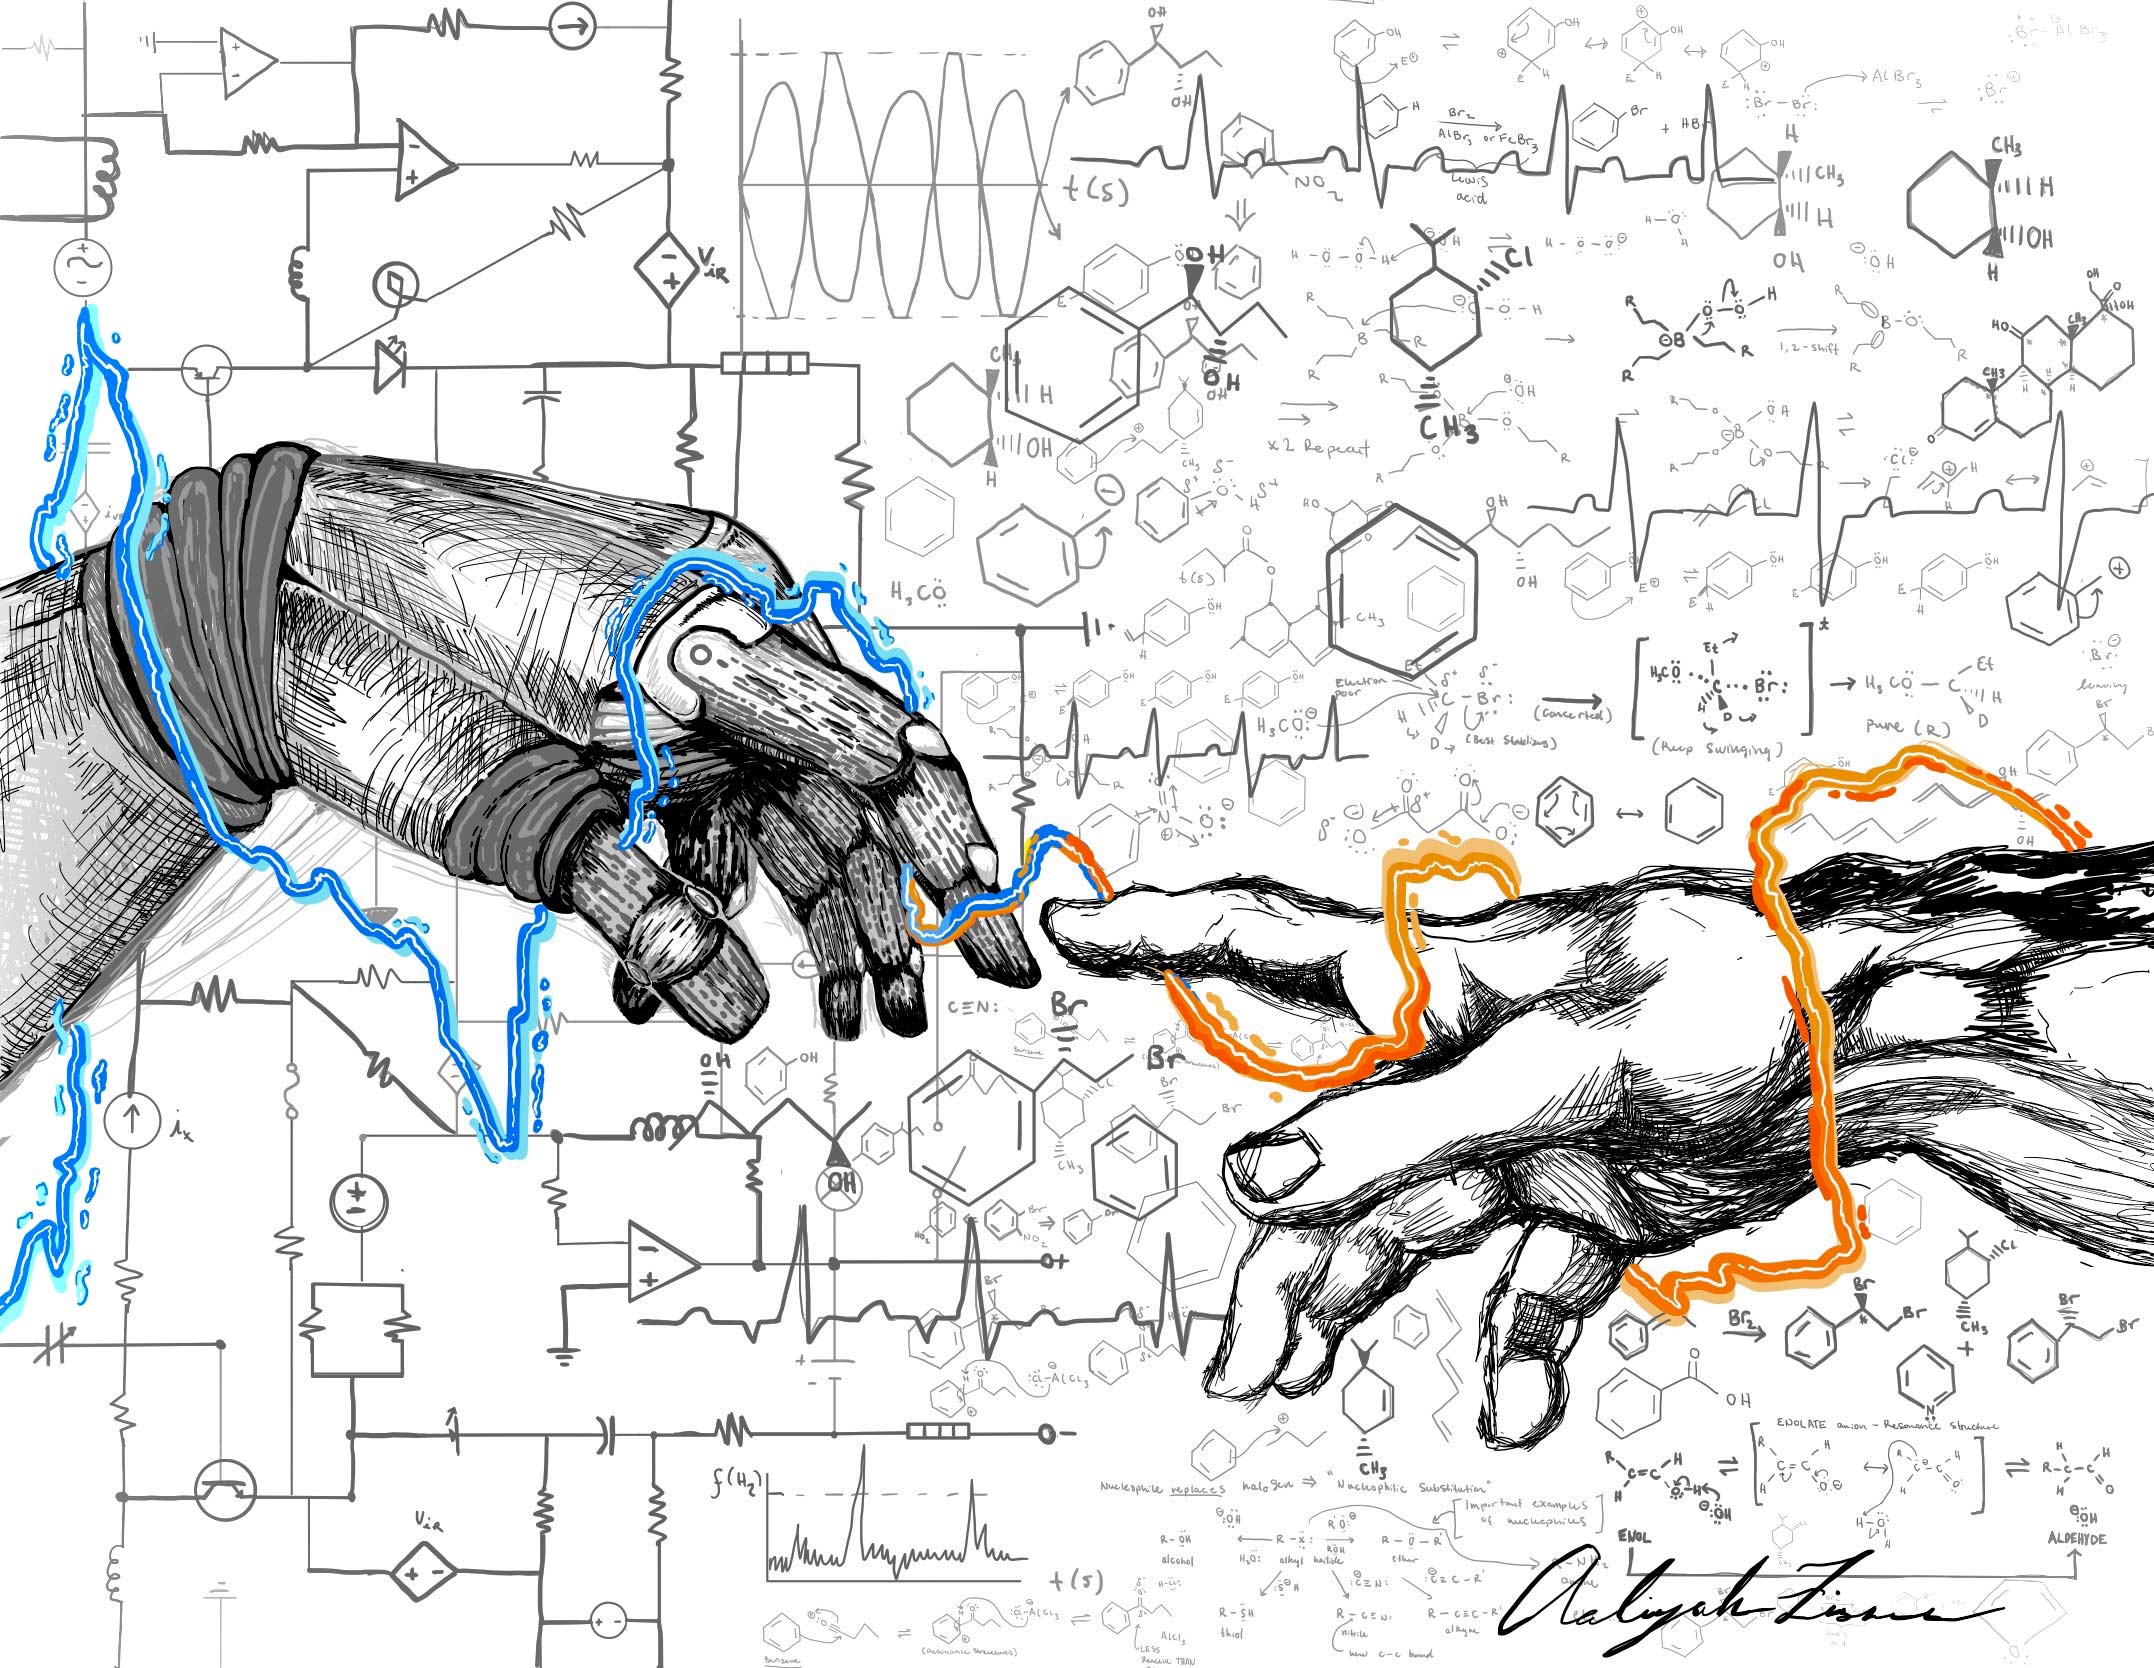 Two sketched hands, one with orange electric bolts and one with blue electric bolts, nearly touching fingertips, with equations in the background.